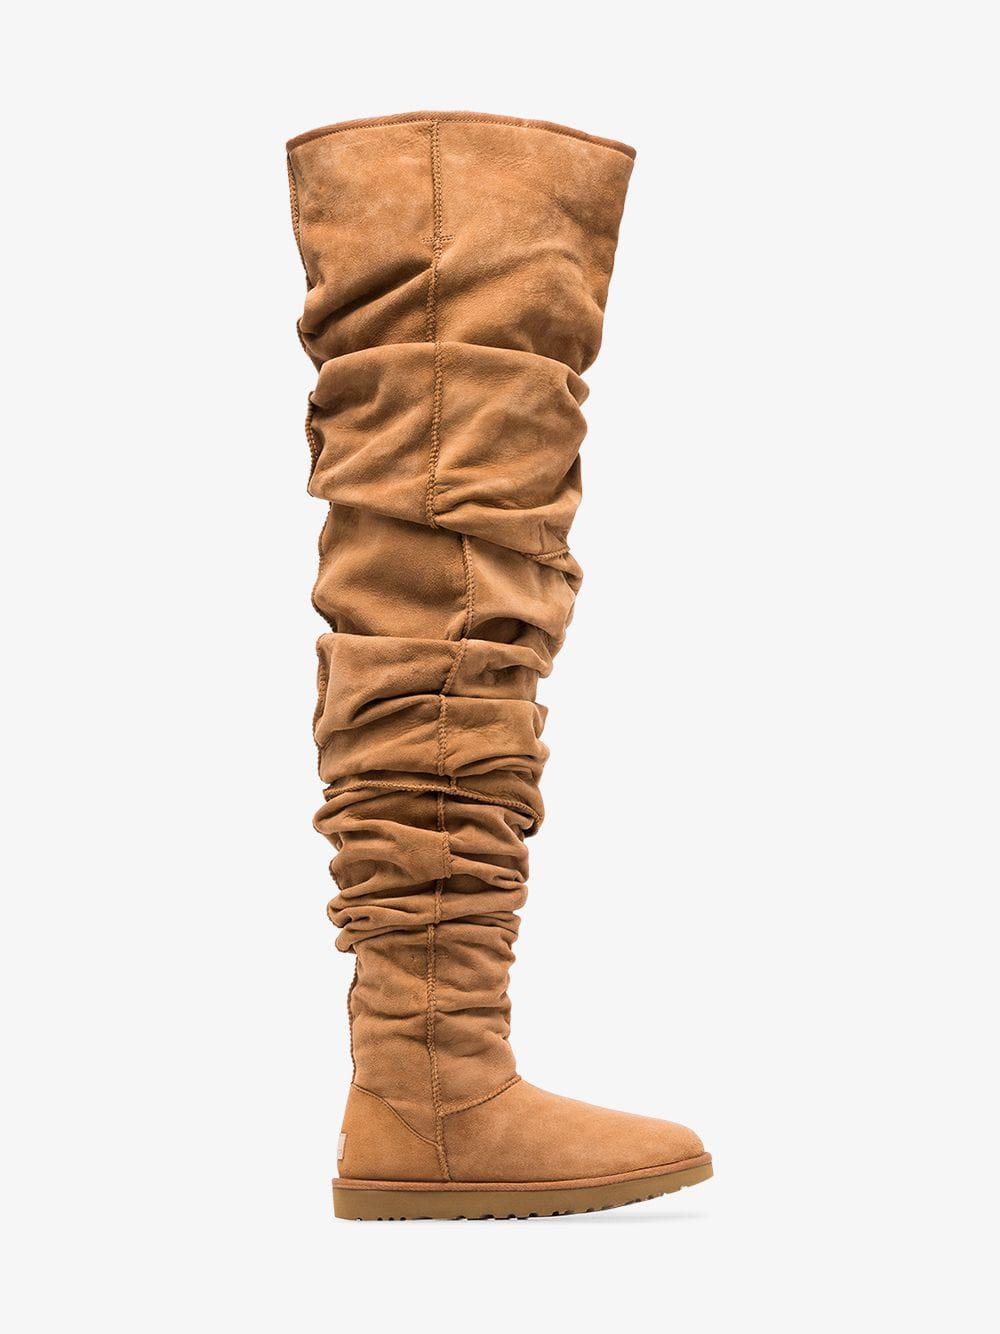 y project thigh high uggs